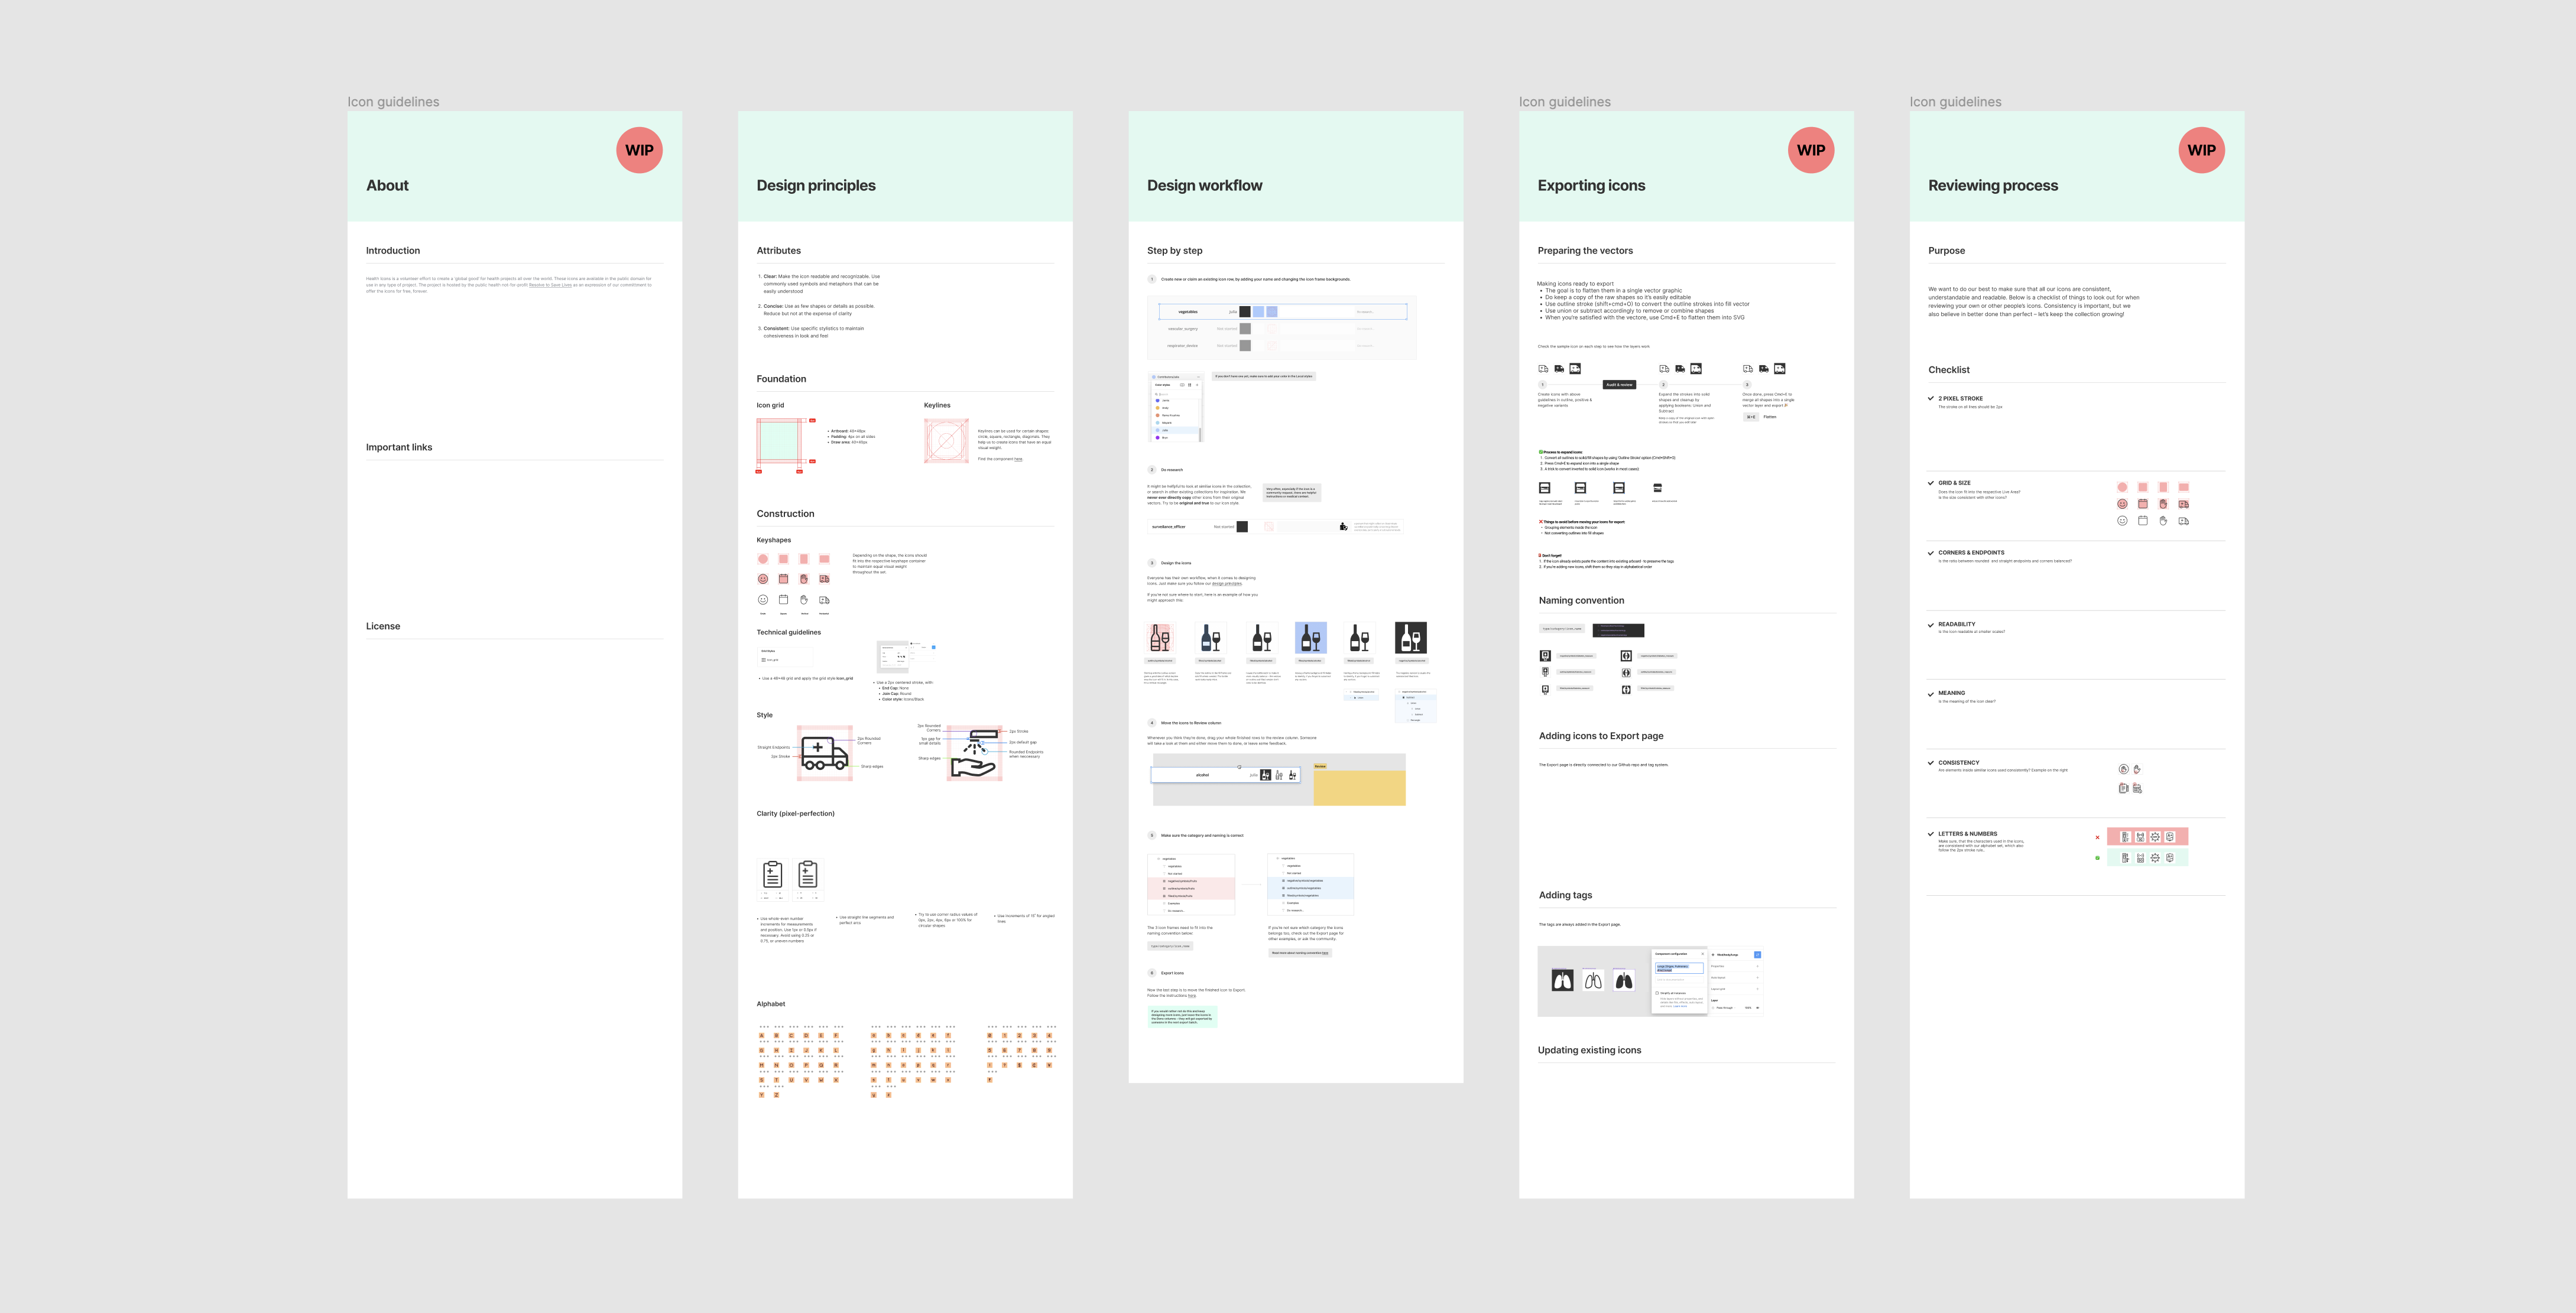 Defining icon guidelines in Health Icons' Figma file